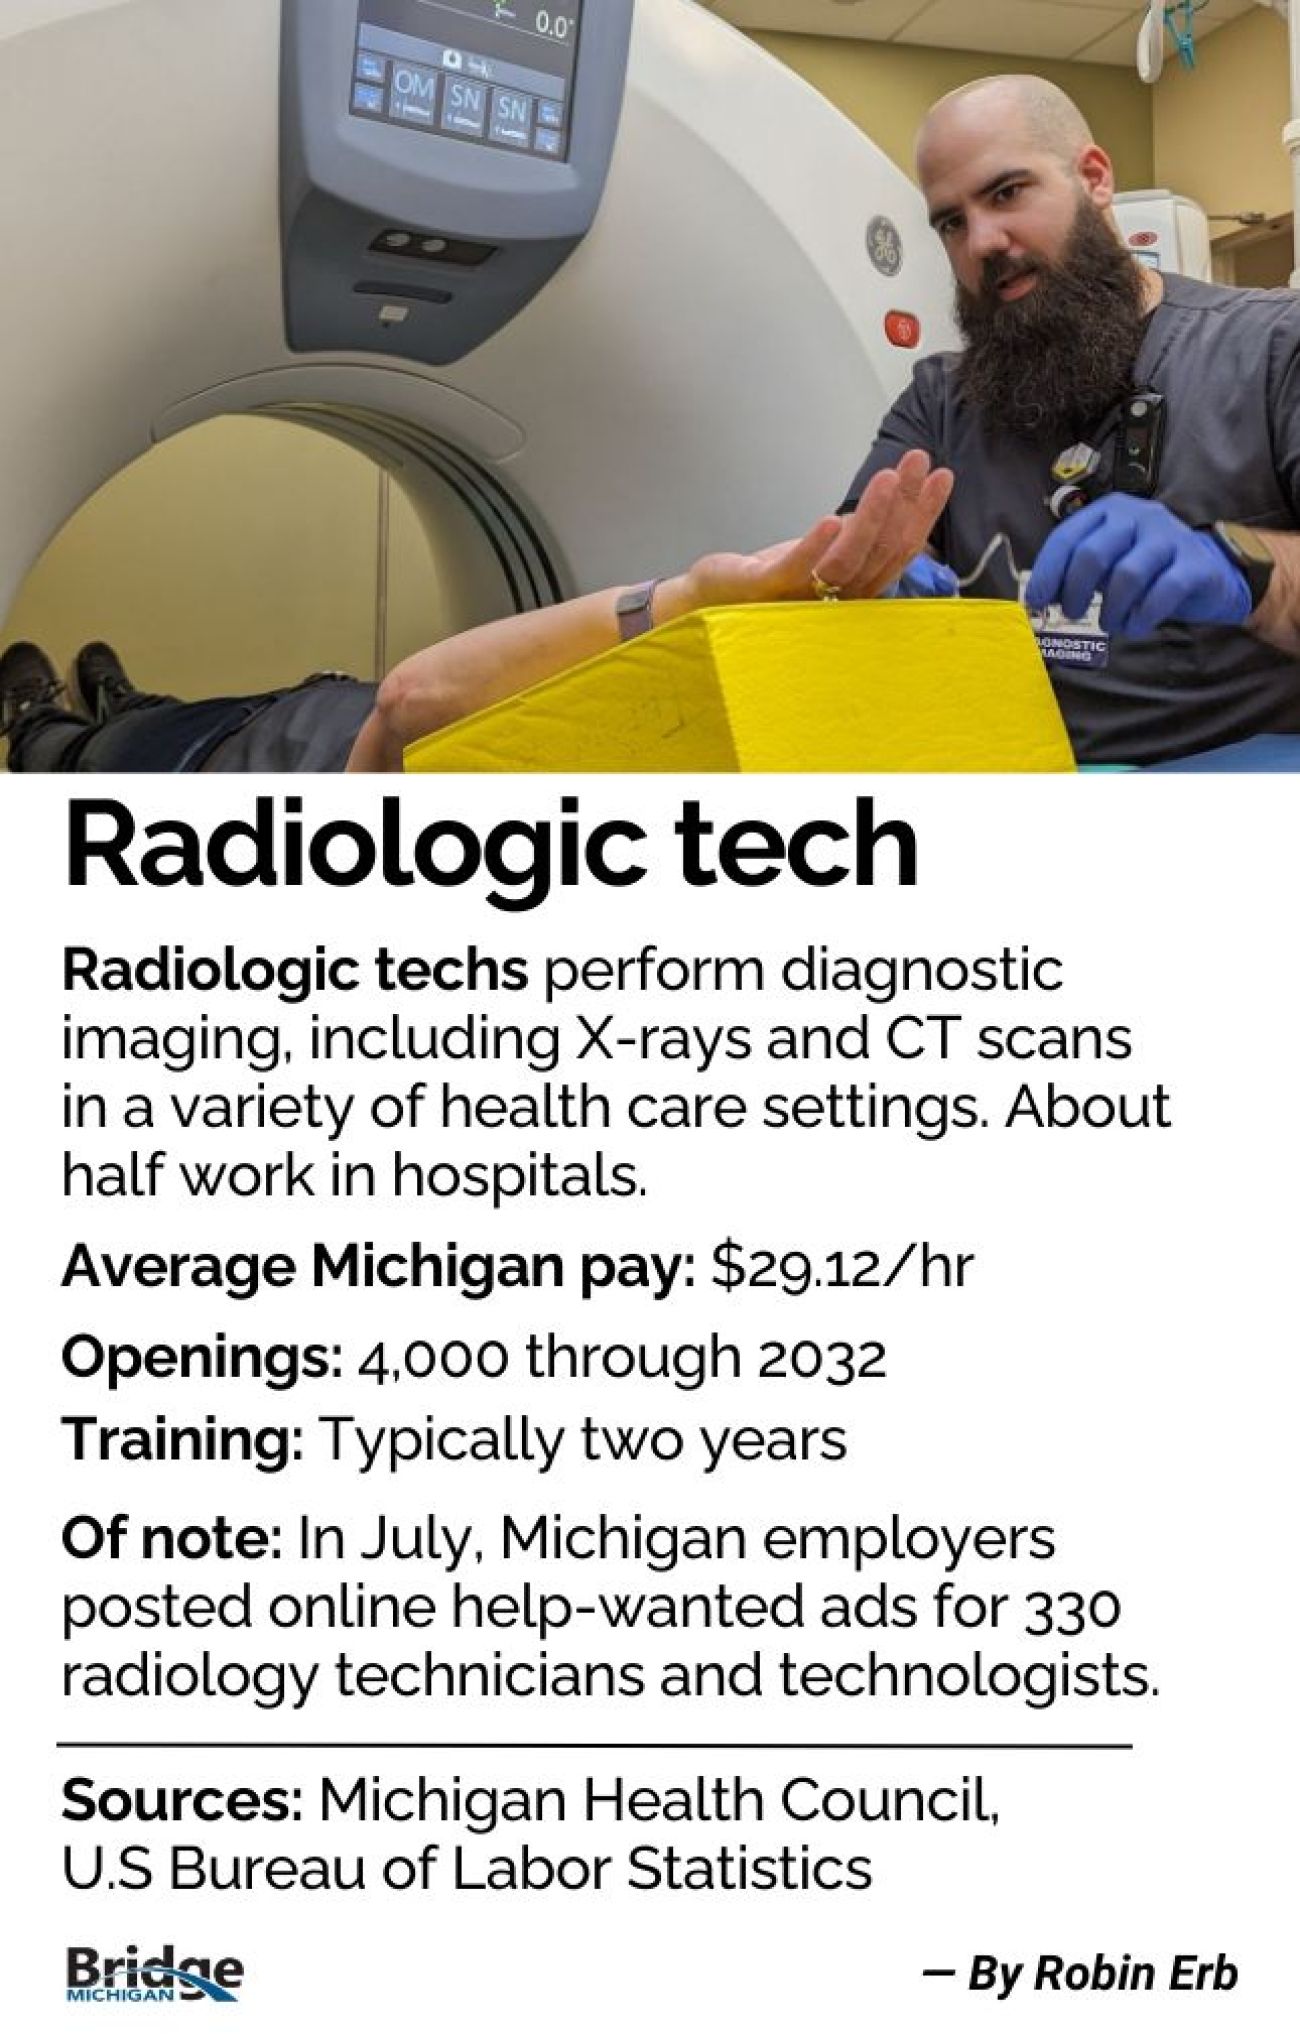 information about radiology tech